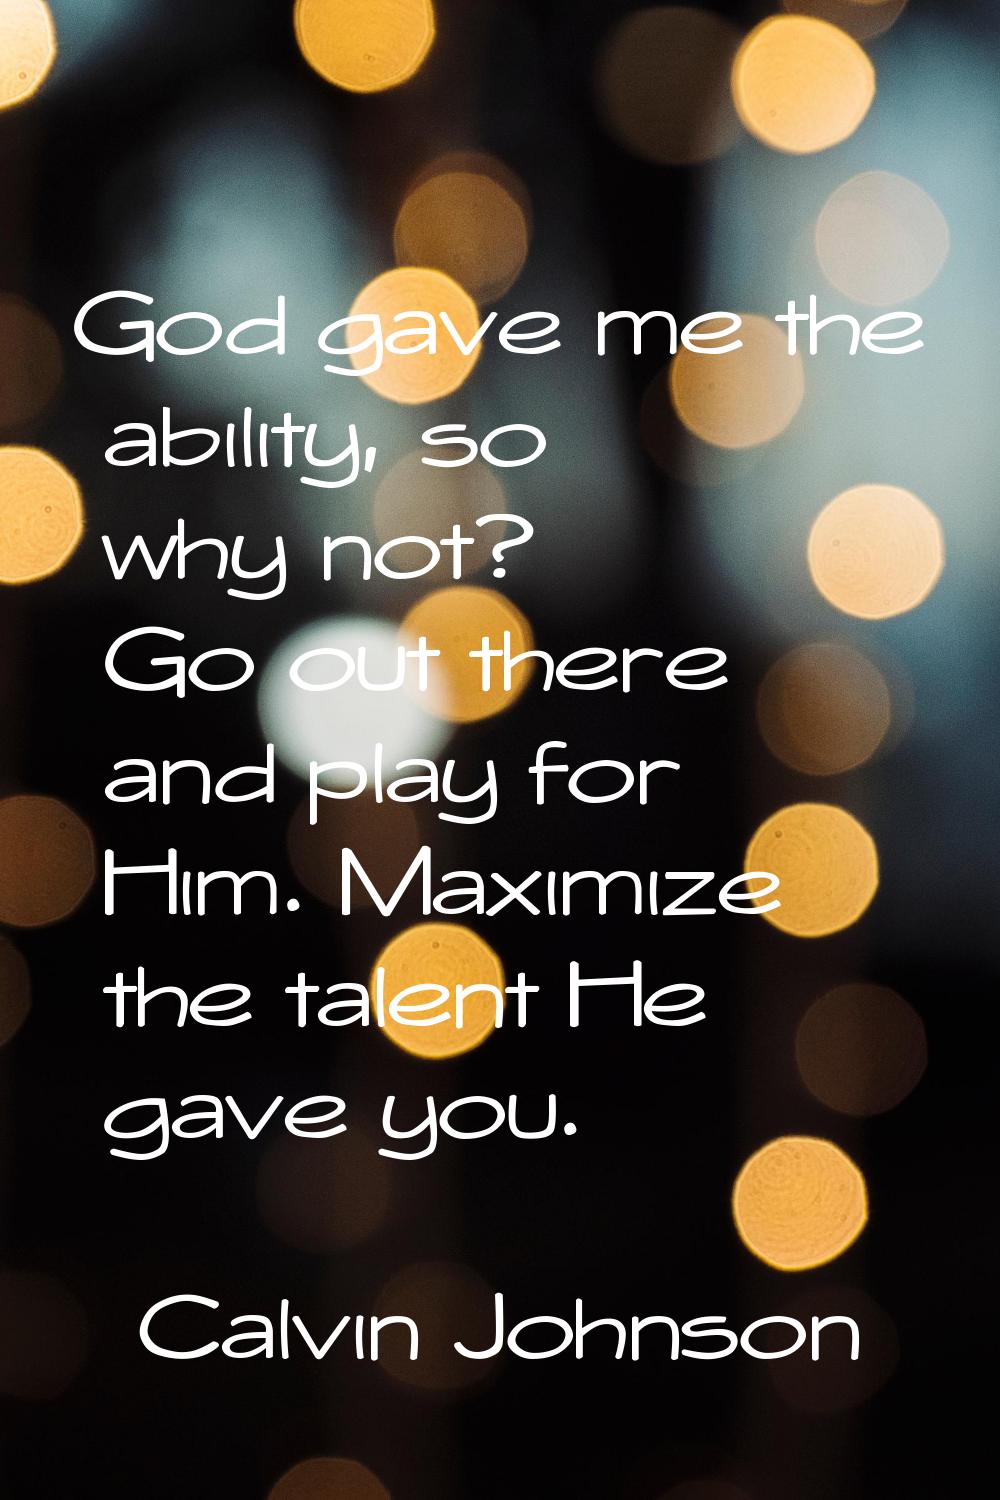 God gave me the ability, so why not? Go out there and play for Him. Maximize the talent He gave you